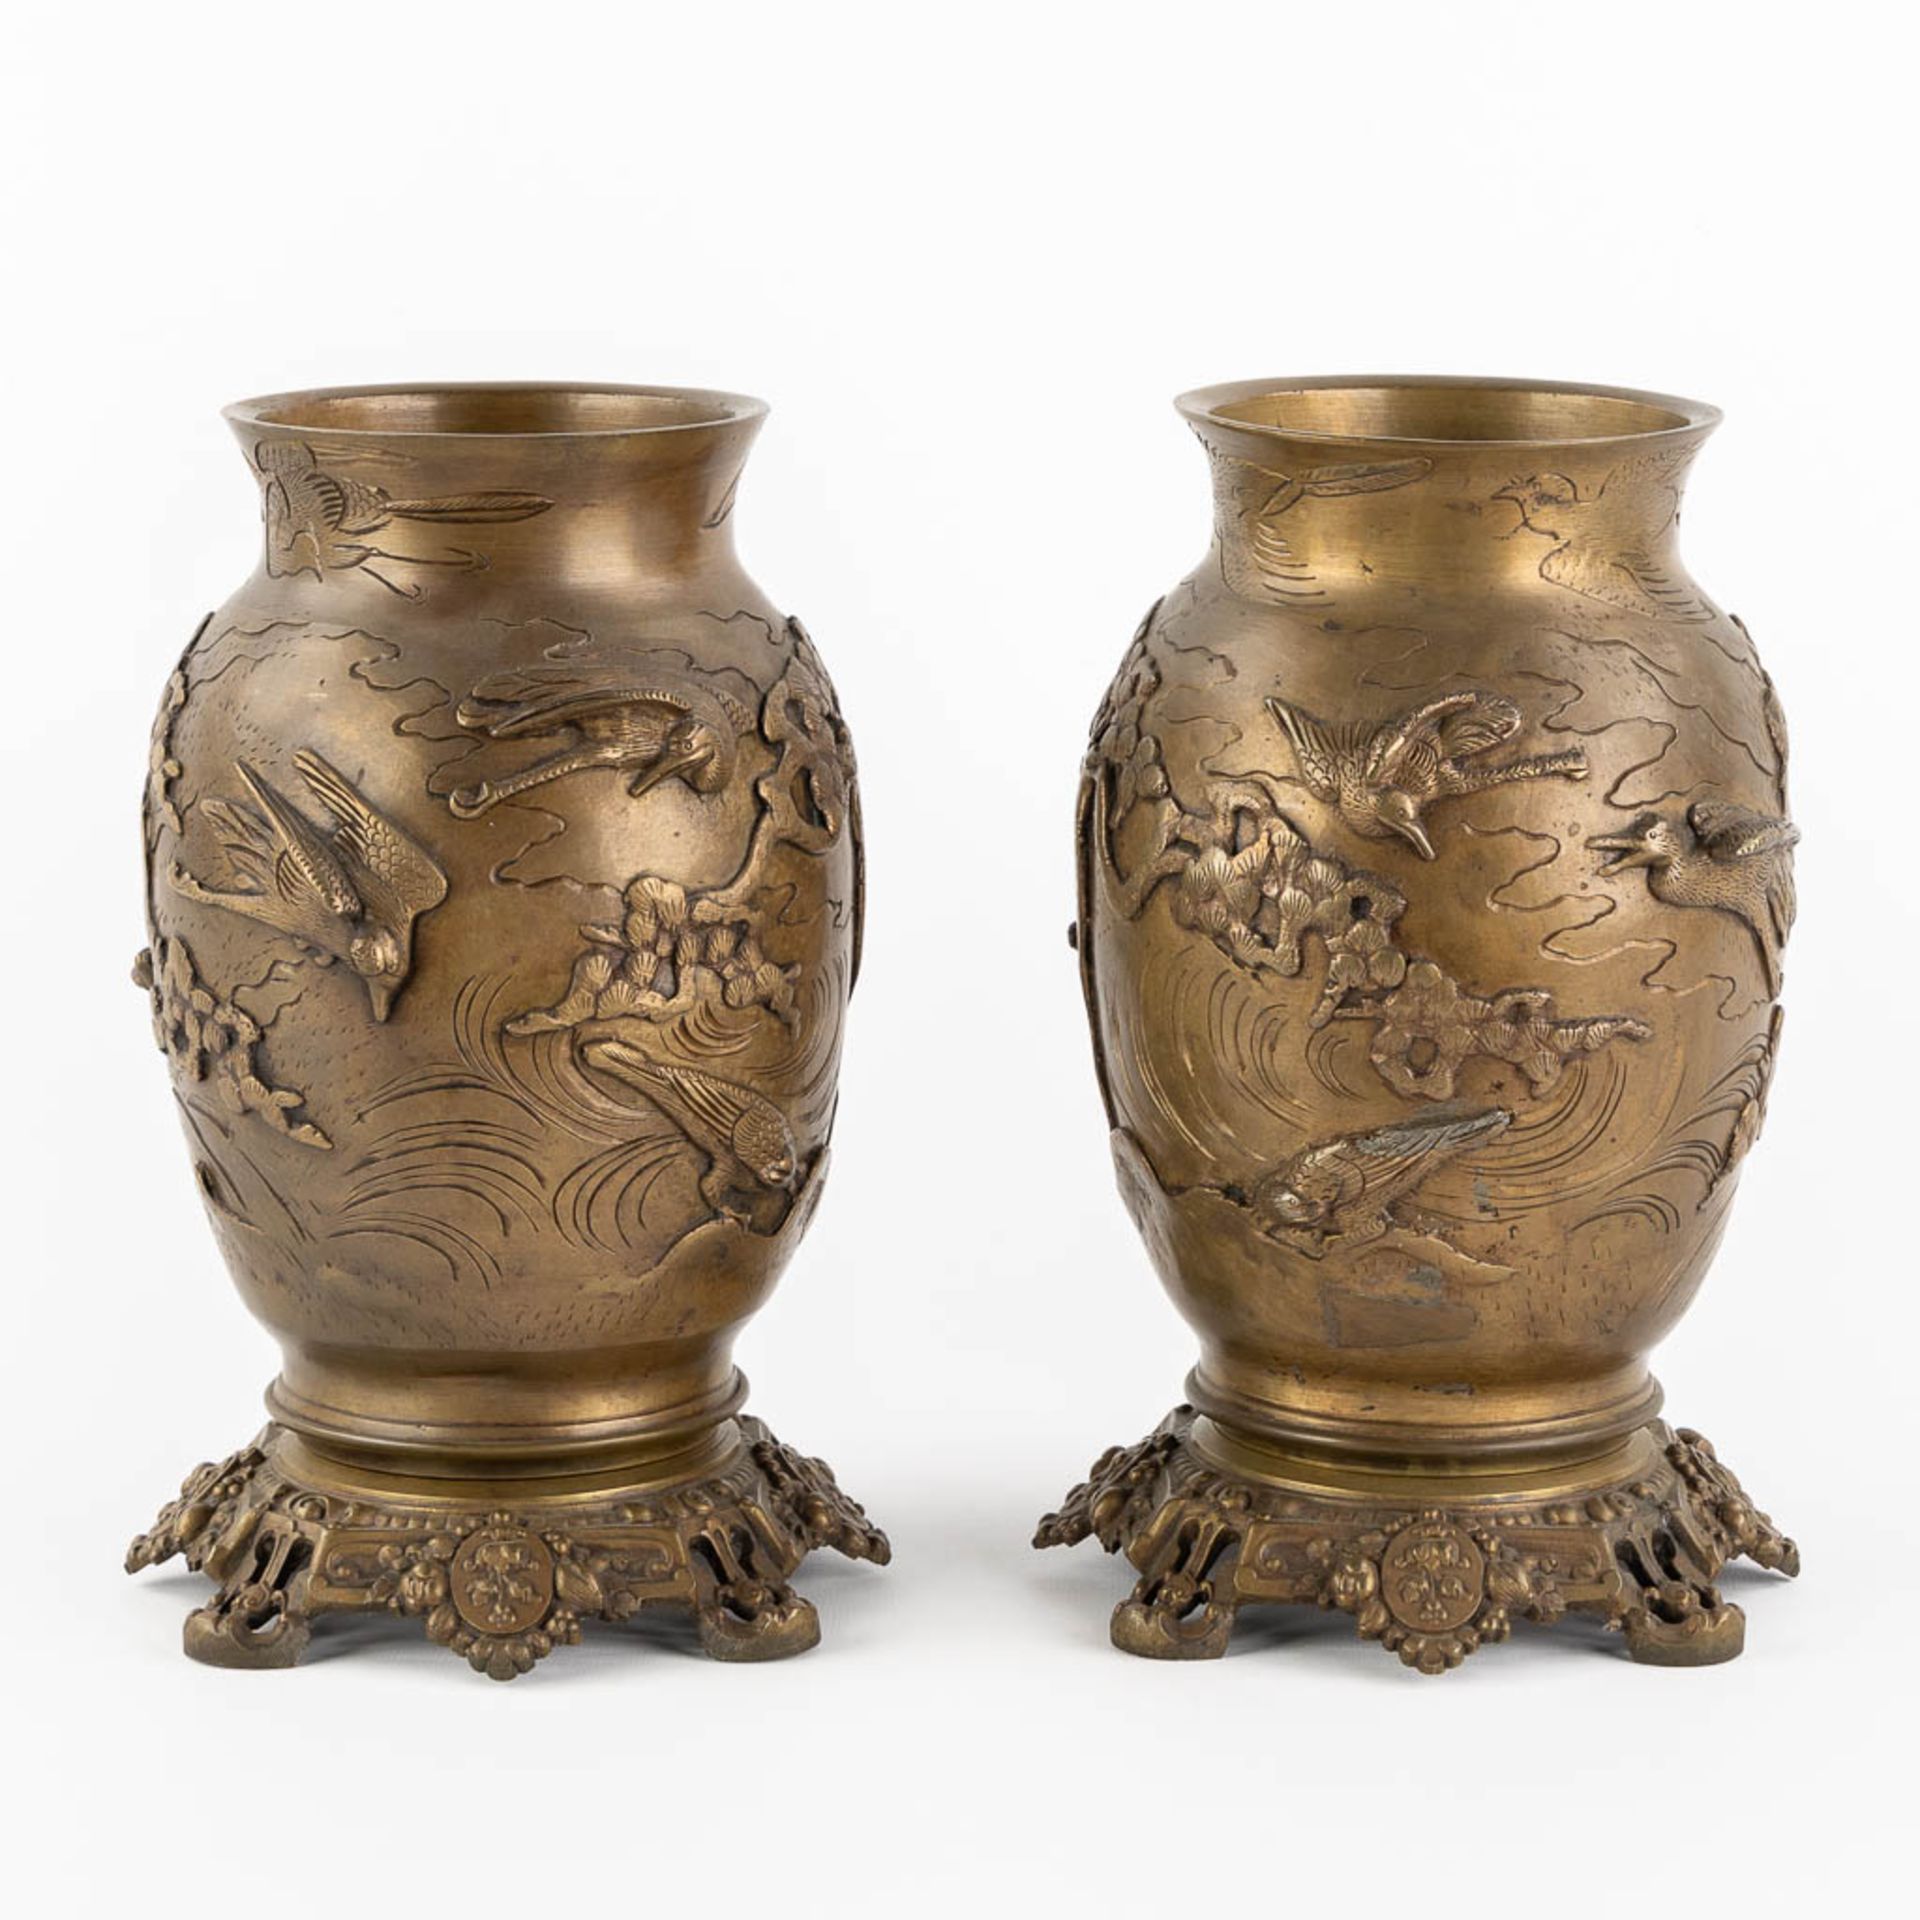 A pair of Oriental vases, depicting flying birds and trees. Patinated bronze. (H:27 x D:16 cm) - Bild 4 aus 16